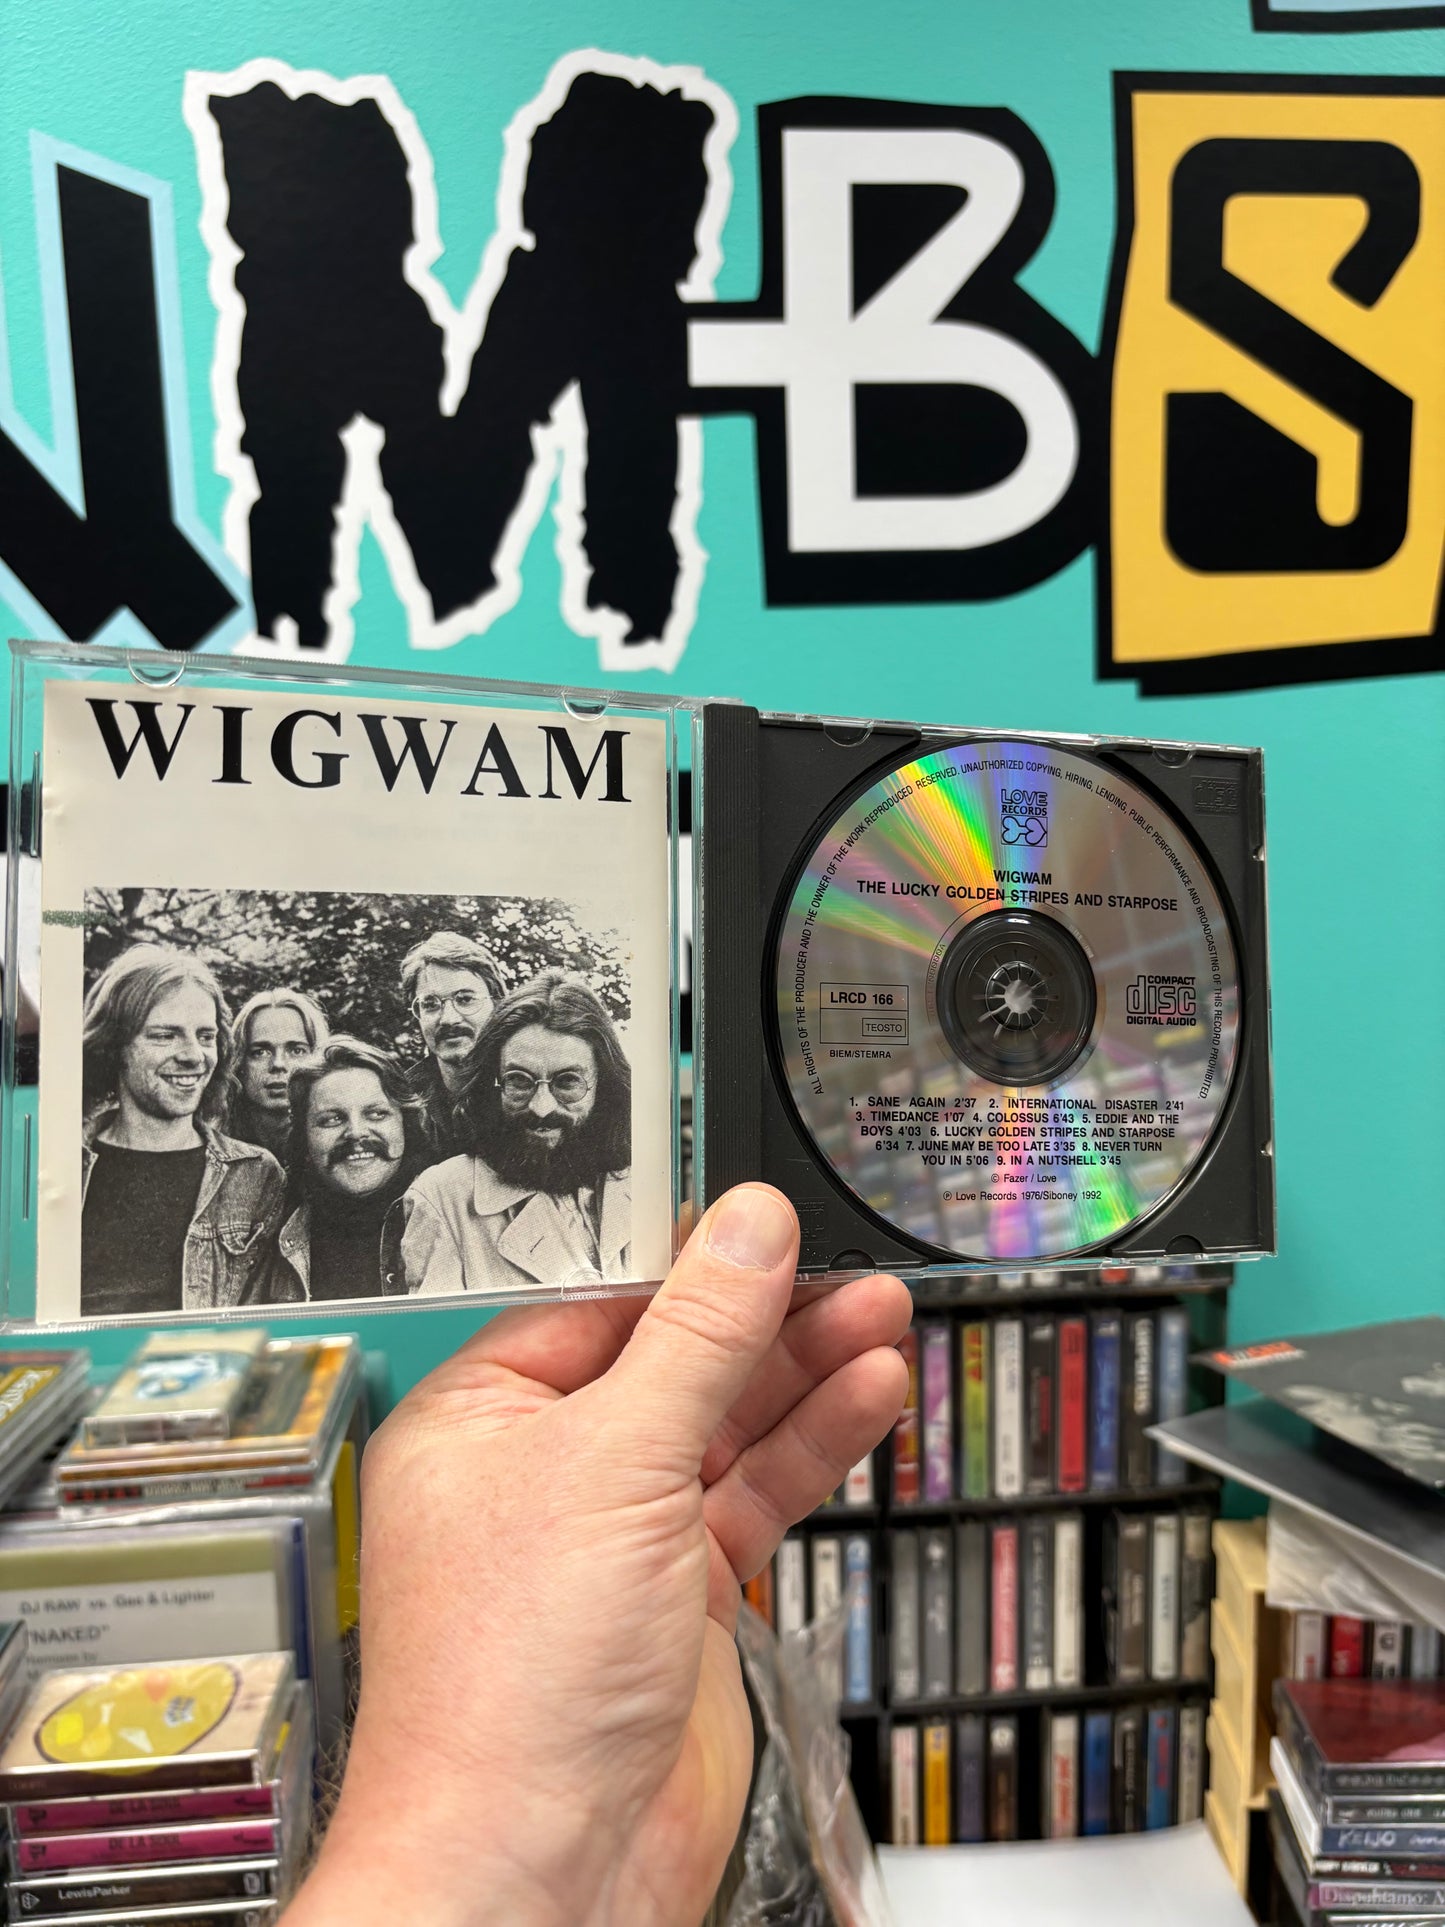 Wigwam: Lucky Golden Stripes And Starpose, CD, reissue, remastered, Love Records, Finland 1992